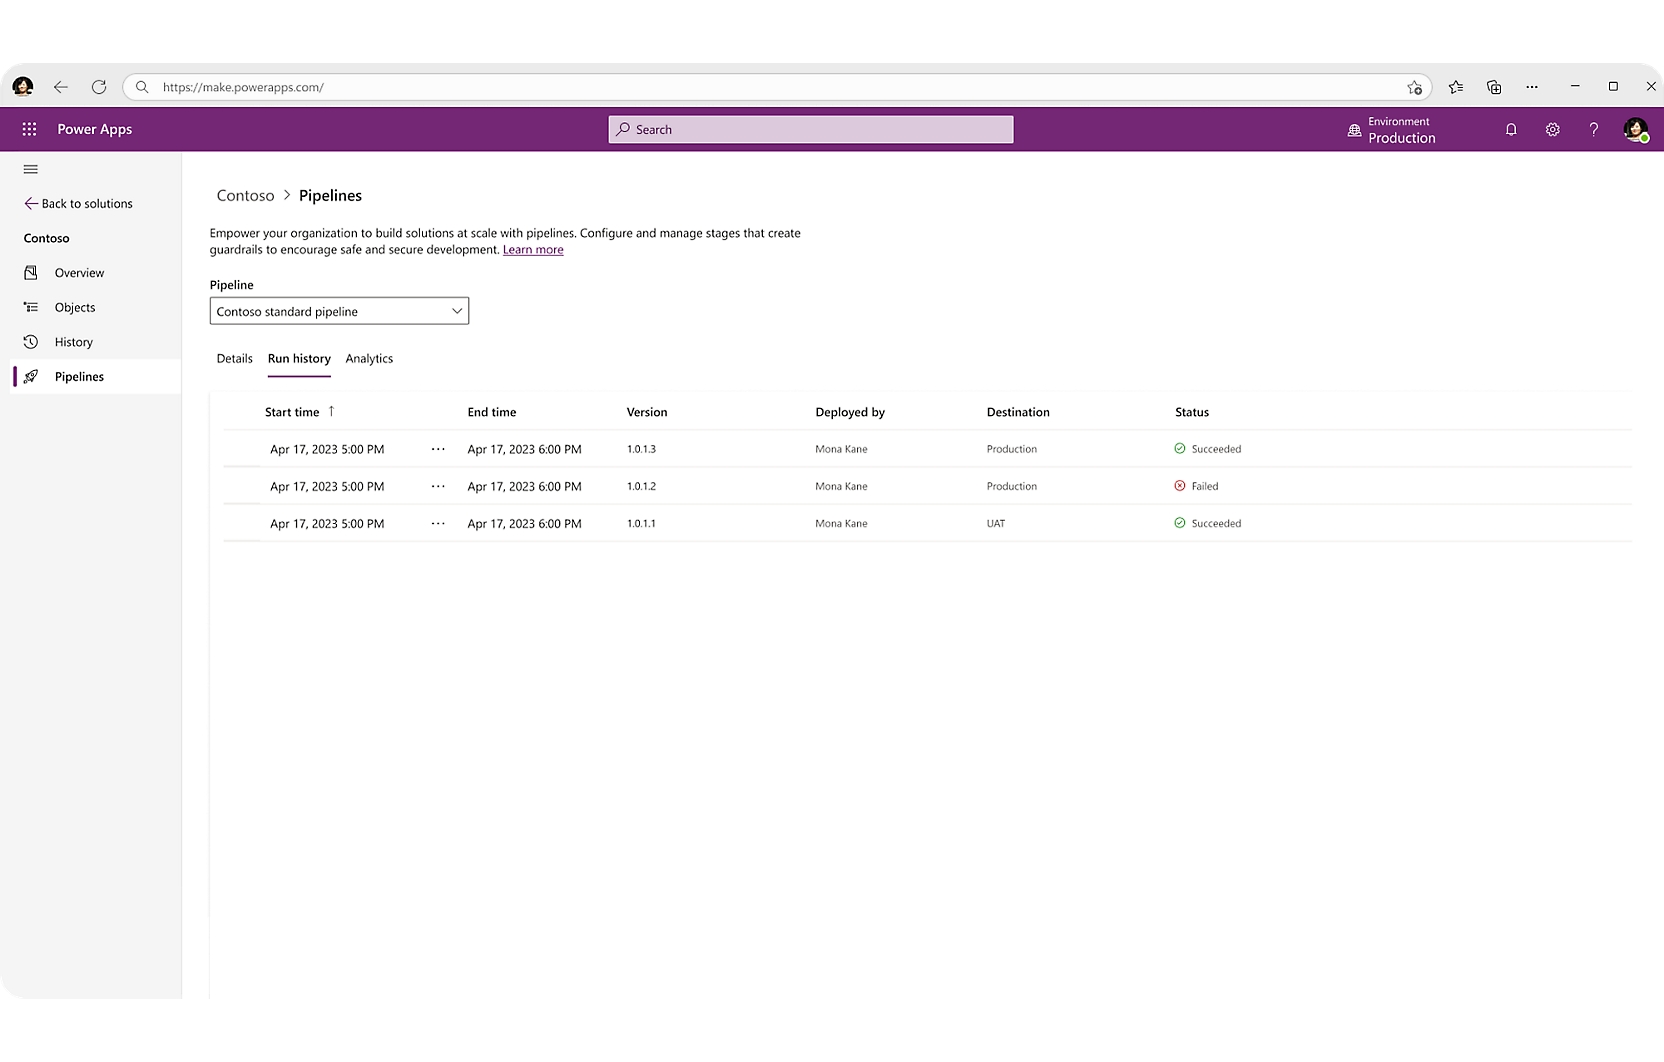 Microsoft Power Apps showing dashboard for pipelines.